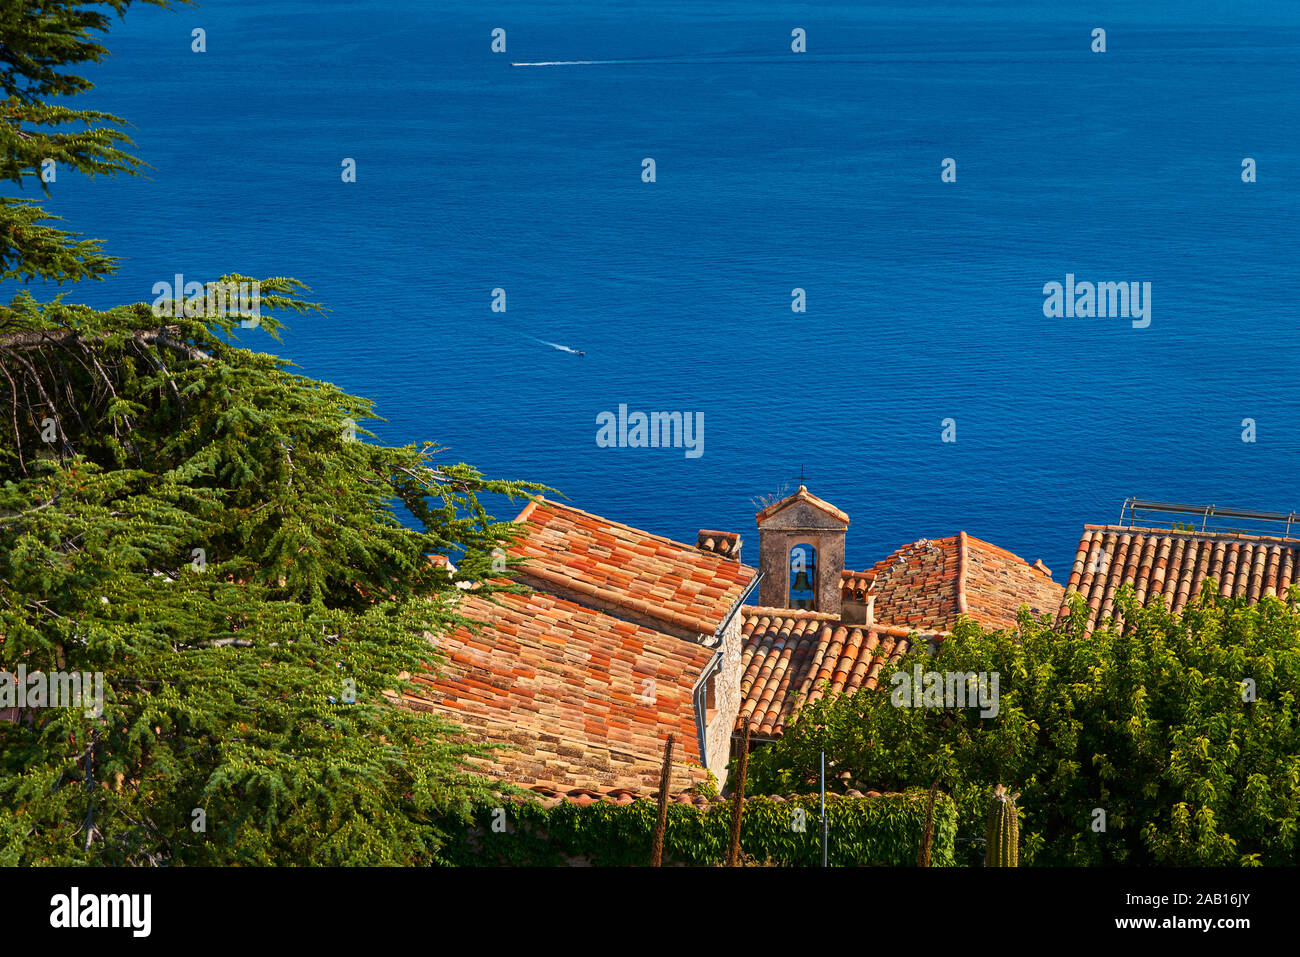 Terra cotta tile rooftops of the Village of Eze contrasting with the deep blue of the Mediterranean Sea. French Riviera, Alpes-Maritimes (06), France Stock Photo